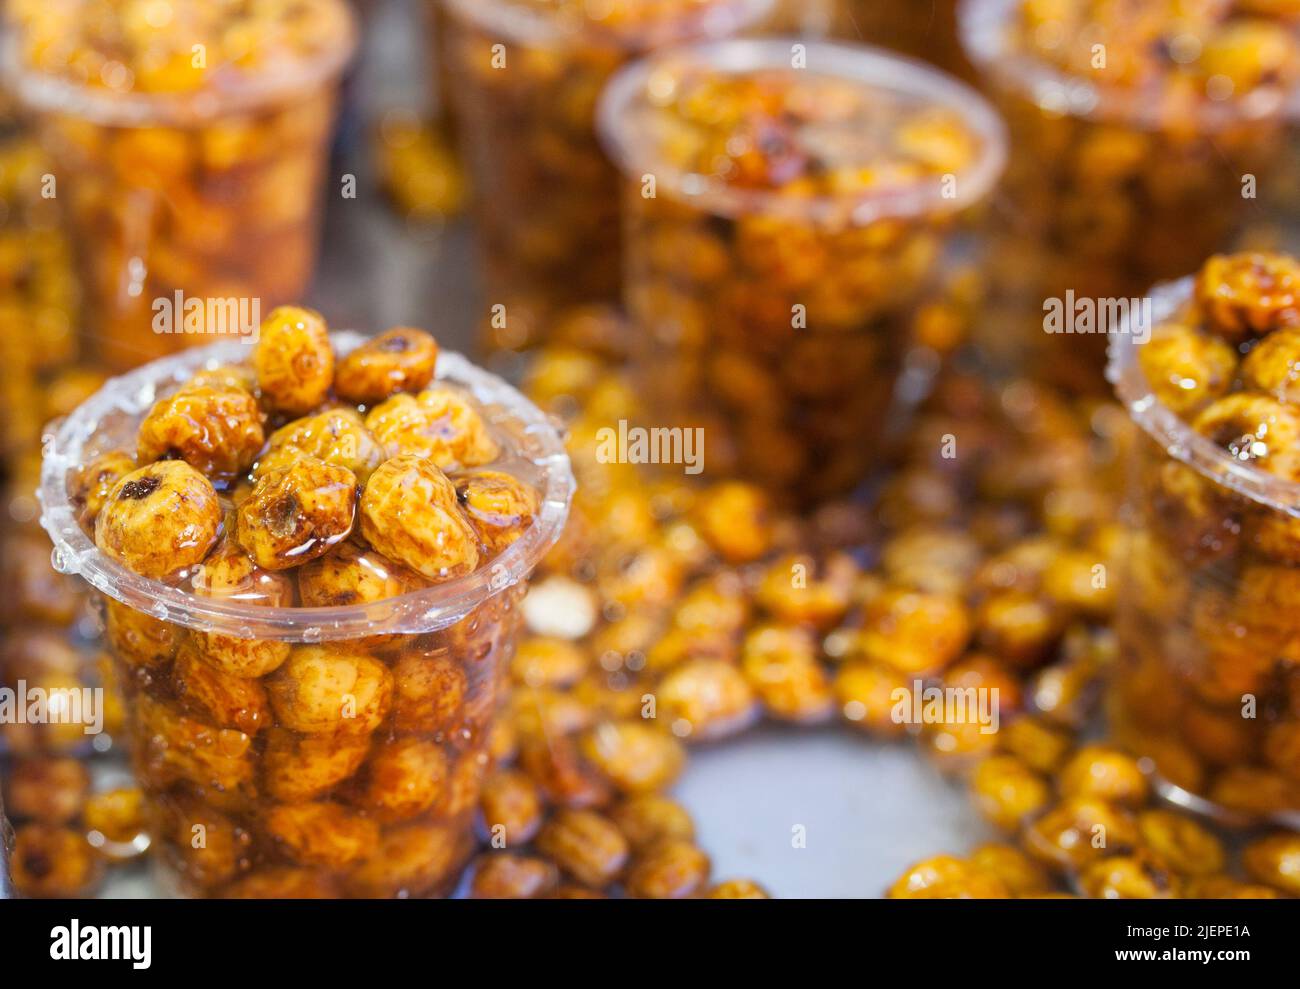 Glasses with tiger nuts or chufas. Water drops falling on cups displayed at street market stall Stock Photo